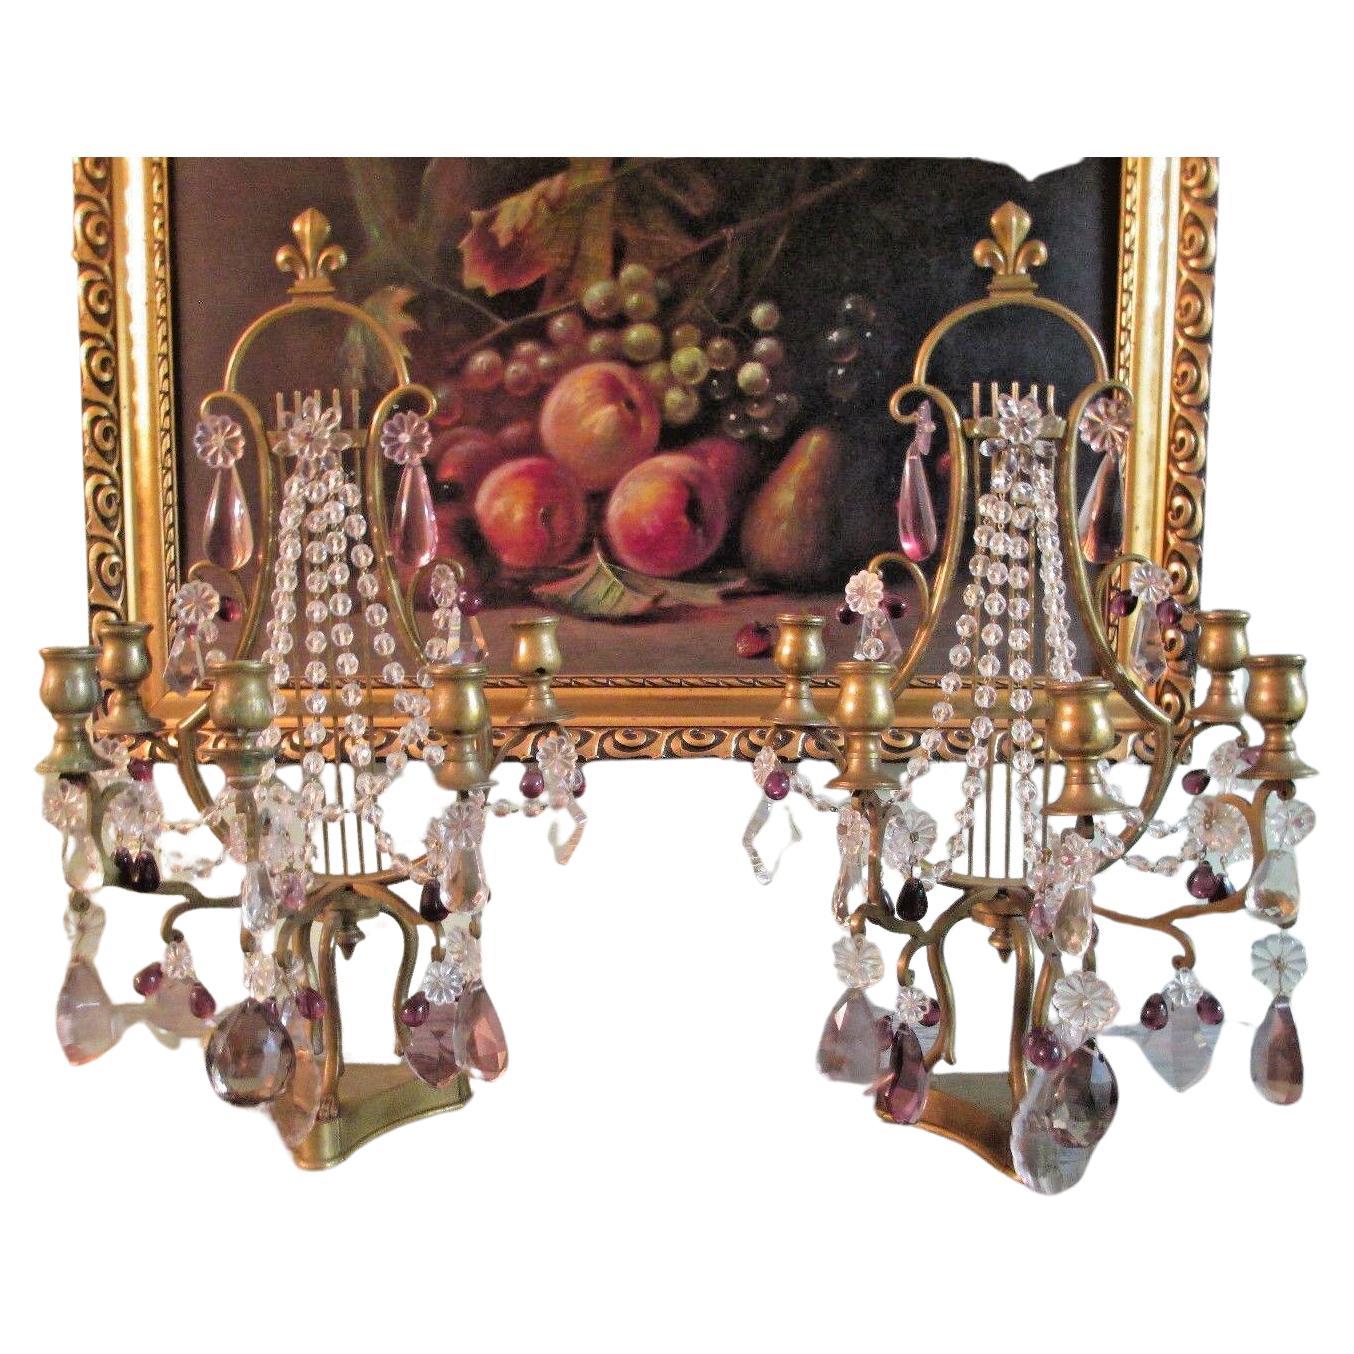 Pair 19th Century French Louis XVI Maison Bagues style Bronze Lyre Back Cut Crystal Adorned Candelabra/ Candle Lamps/ Candel Holders/ Table Lamps. These are stunning and would look great on the mantle top or wherever amazing candle light lighting is